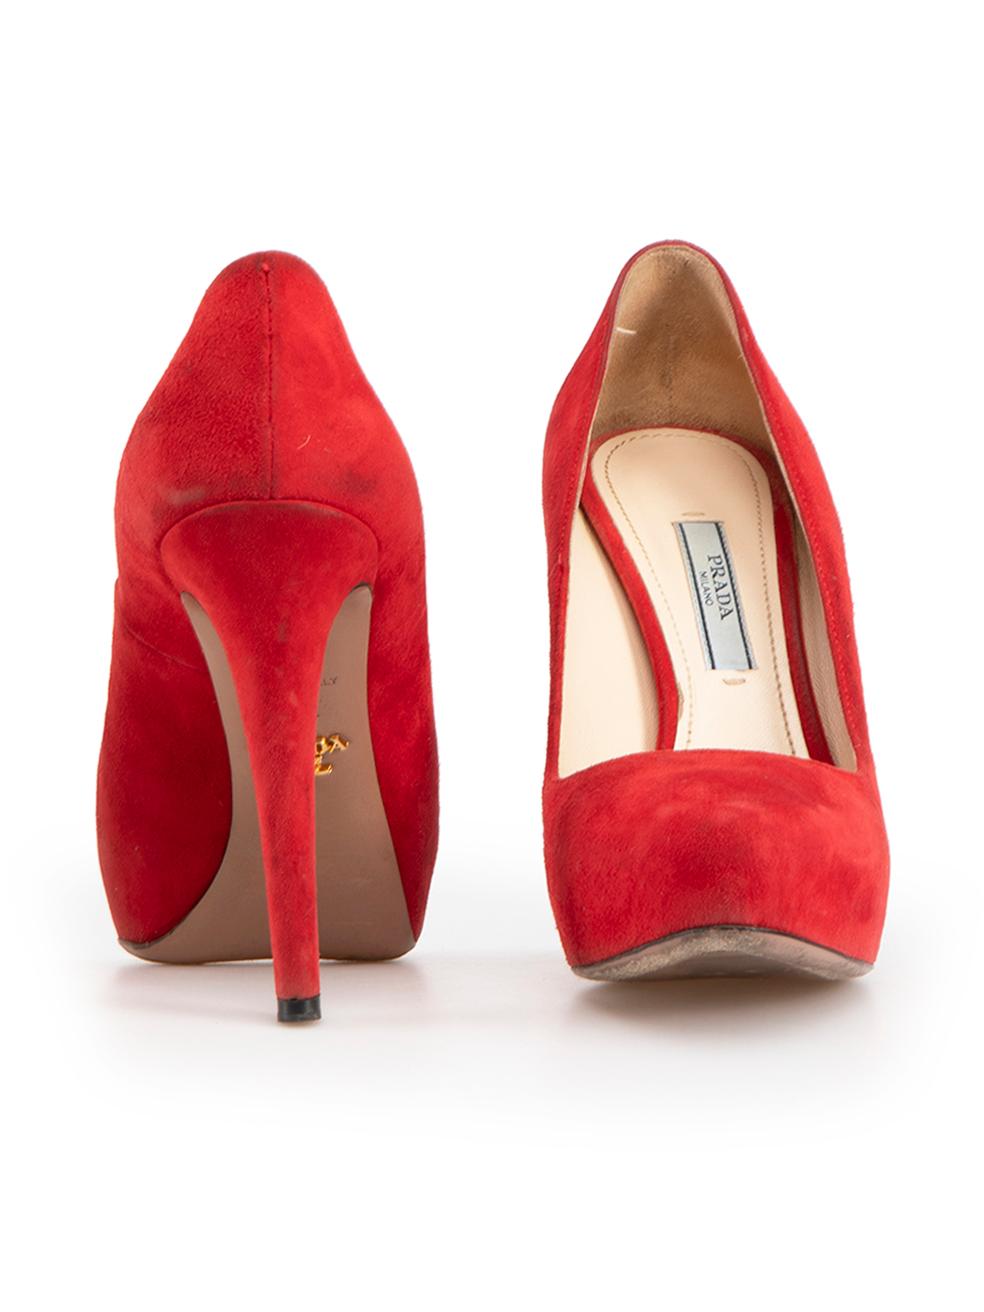 Prada Red Suede Platform Pumps Size IT 36.5 In Good Condition For Sale In London, GB